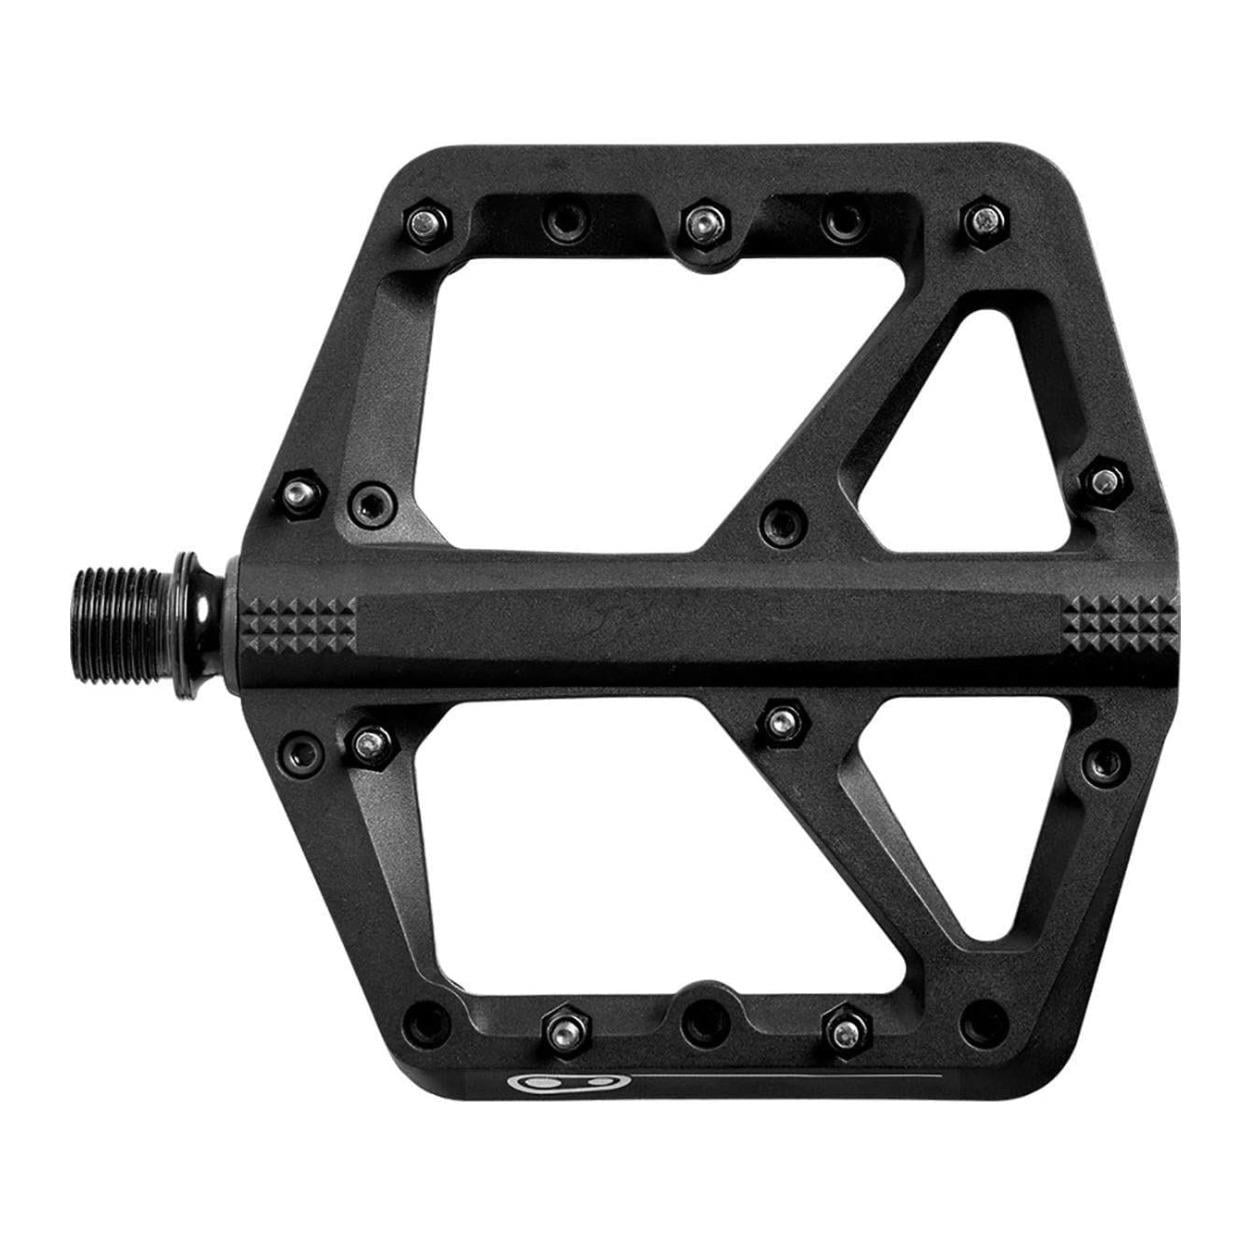 Crank Brothers Stamp 1 Large Pedals - Black